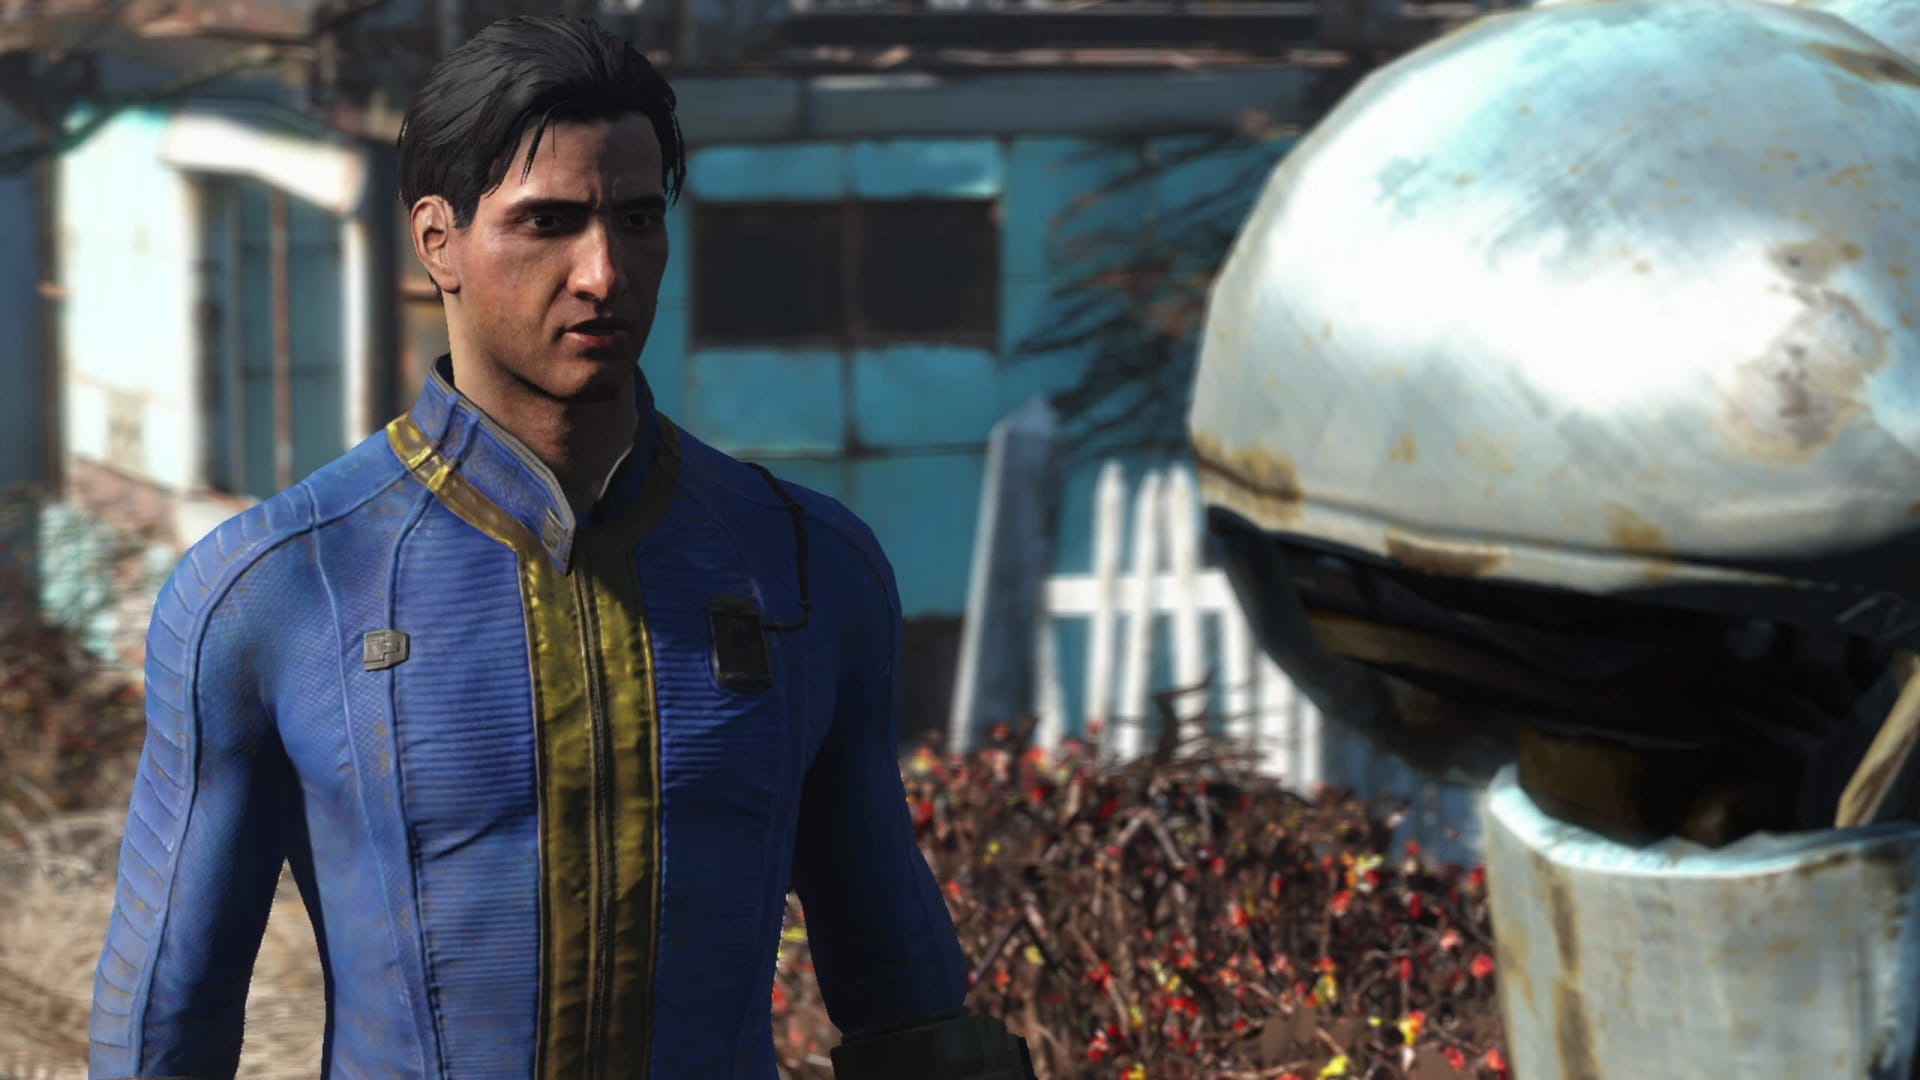 Fallout 4 Current-Gen Update Delayed to 2024, Bethesda Announces